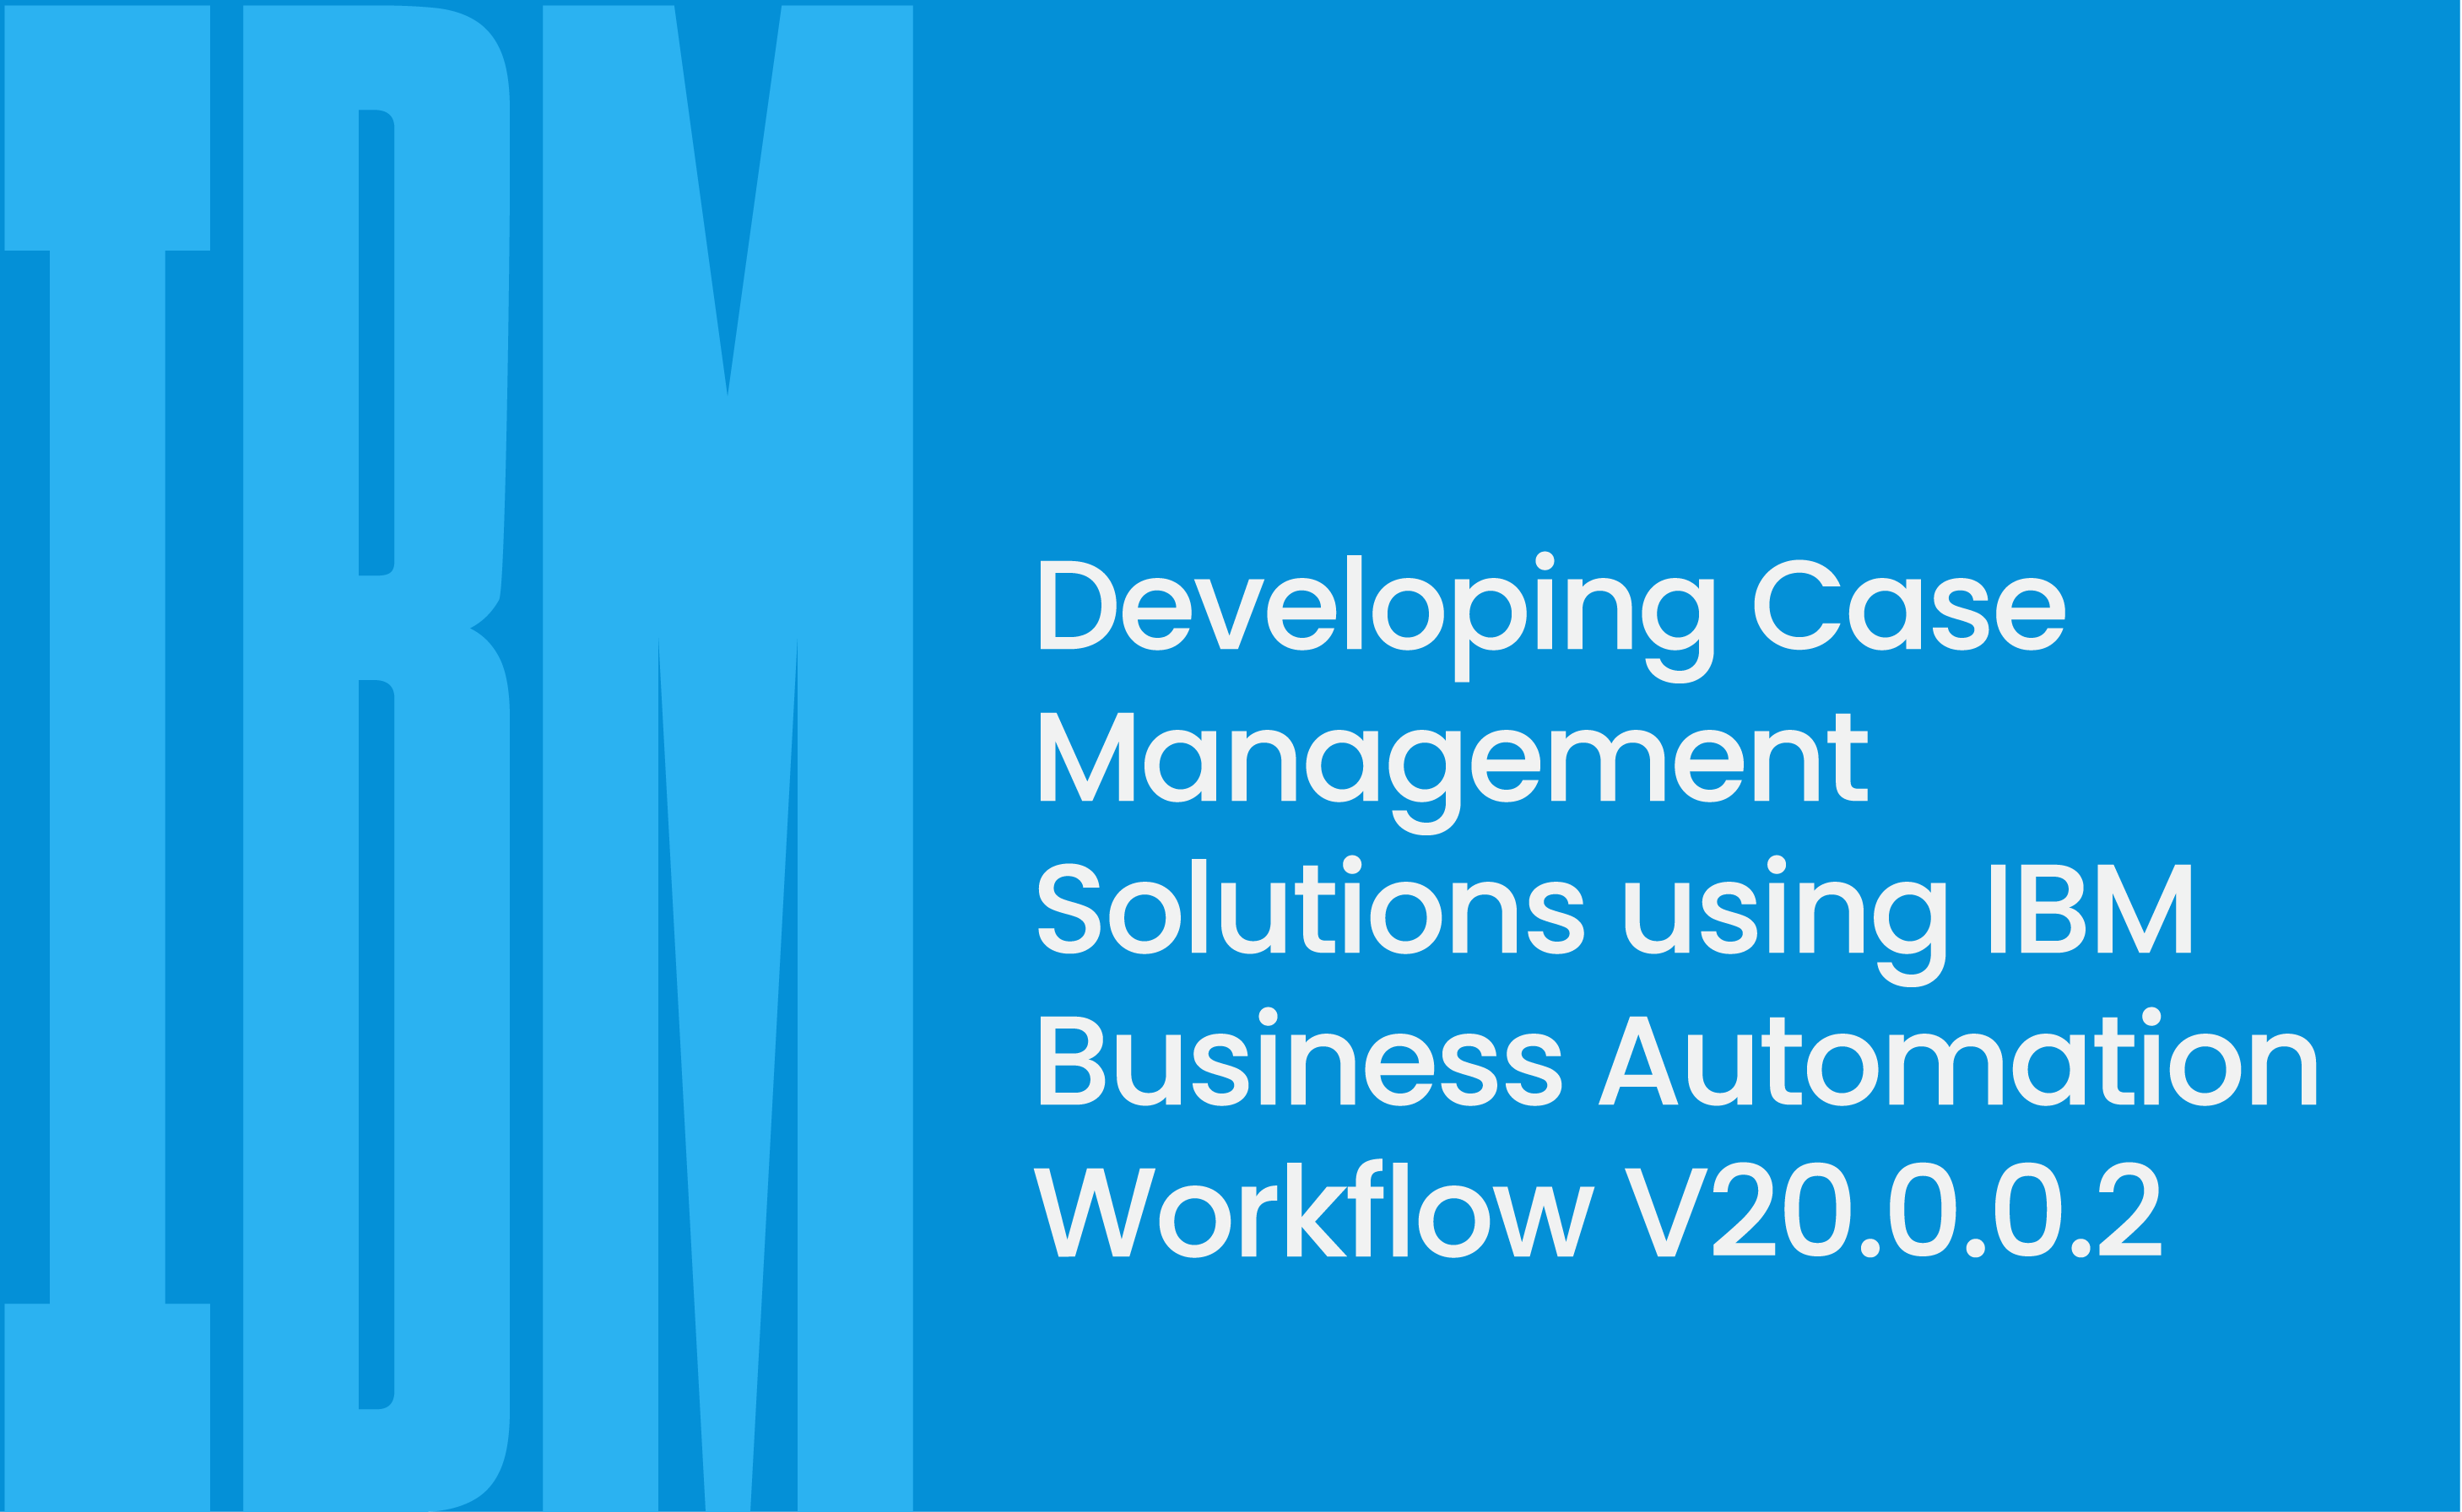 Developing Case Management Solutions using IBM Business Automation Workflow V20.0.0.2